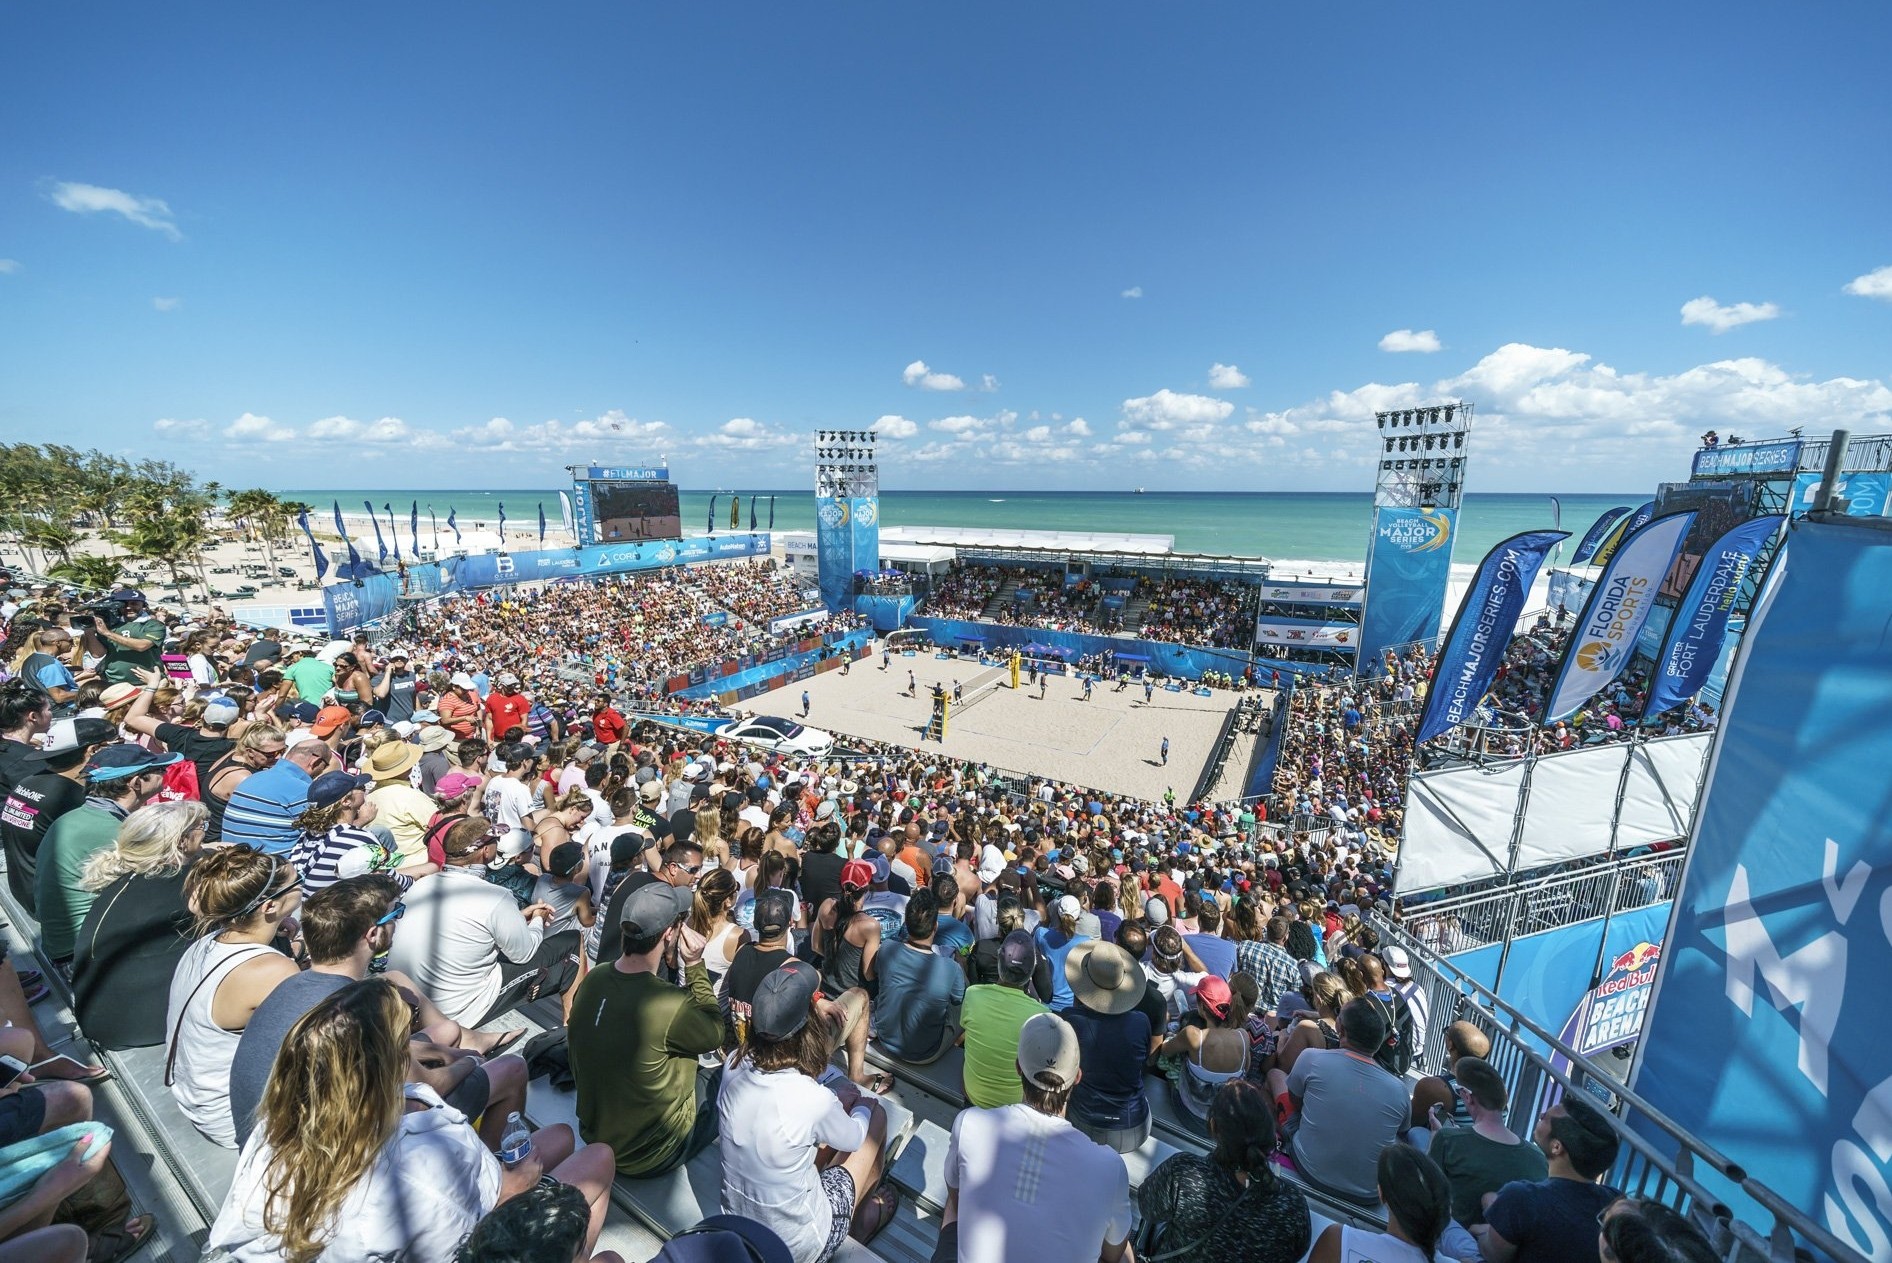 2015 marked the beginning of the Beach Majors Series